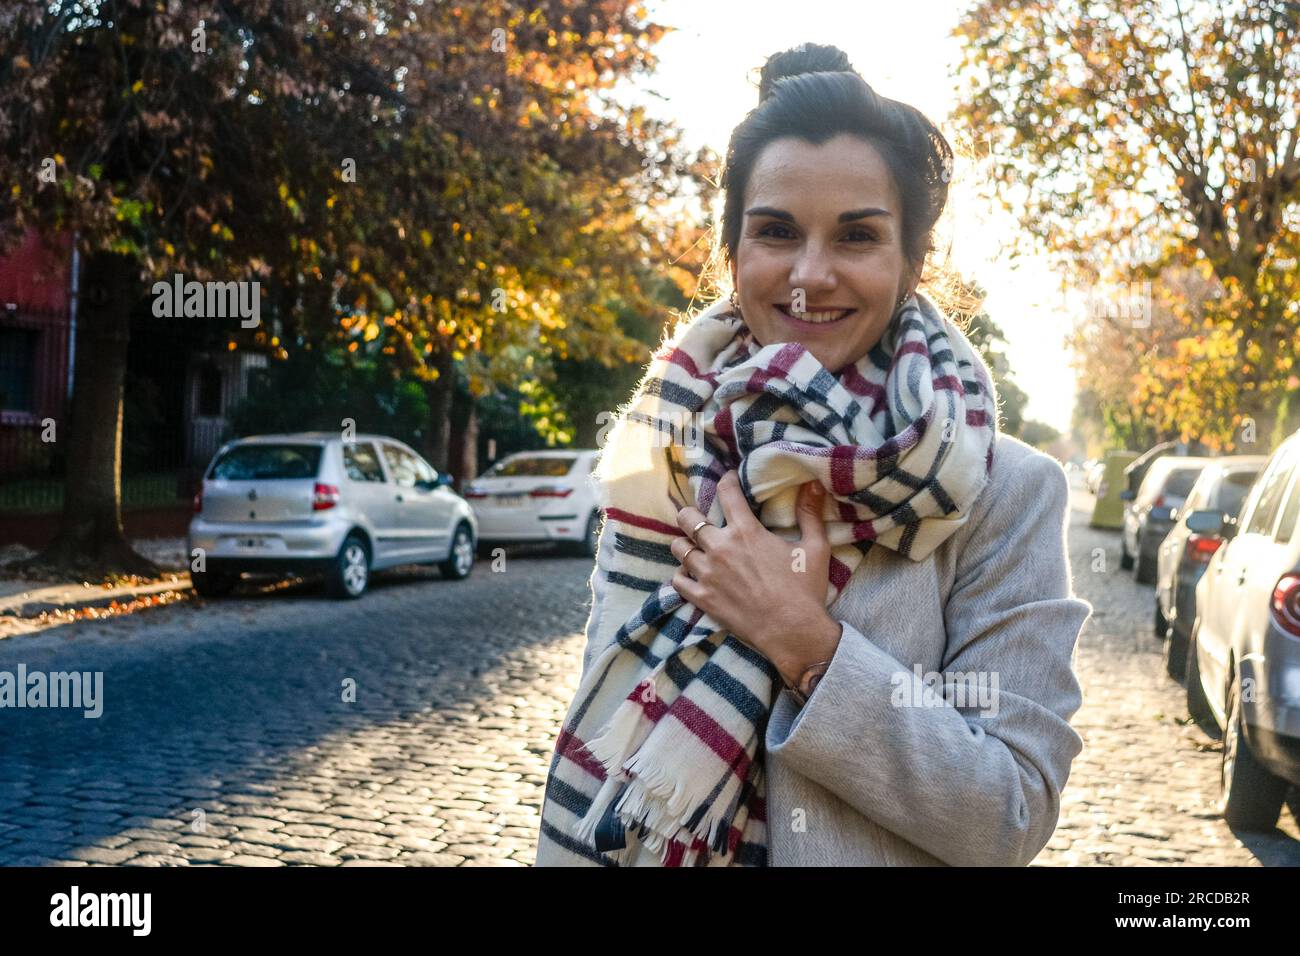 Portrait of smiling young woman with scarf standing on the street Stock Photo